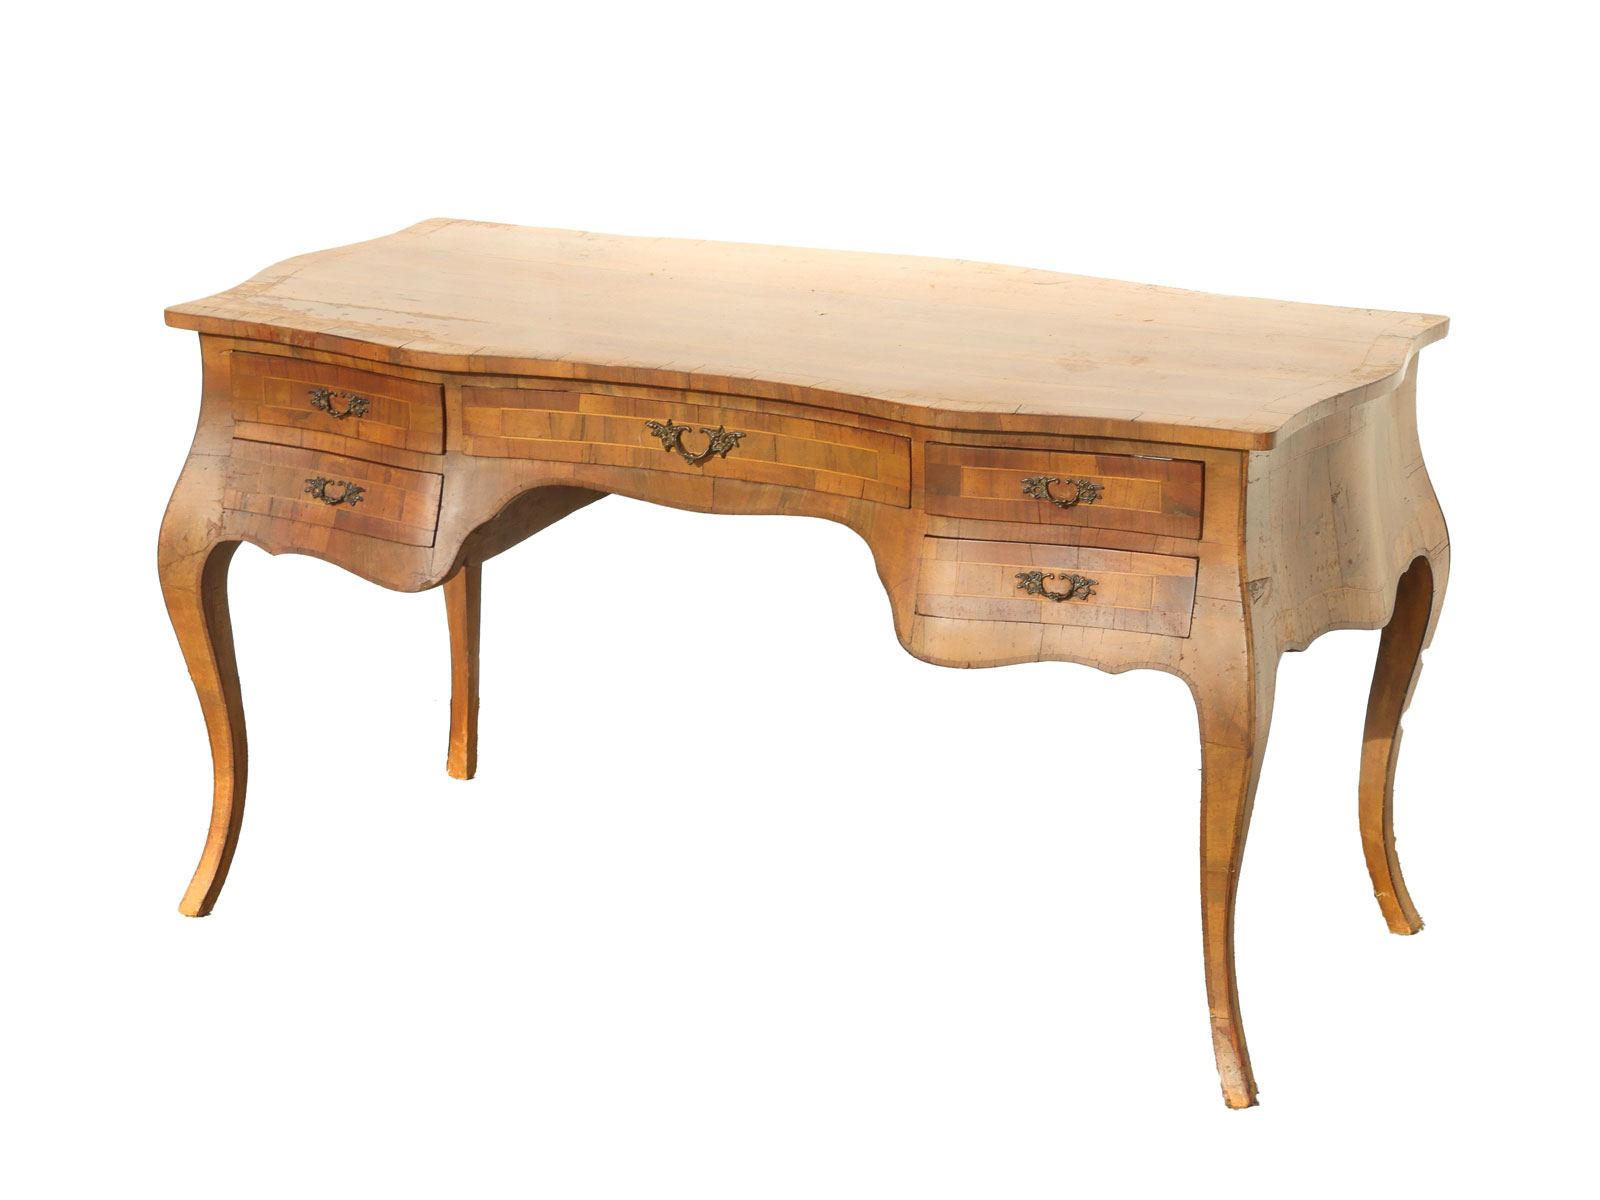 EARLY FRENCH DESK: 19th century